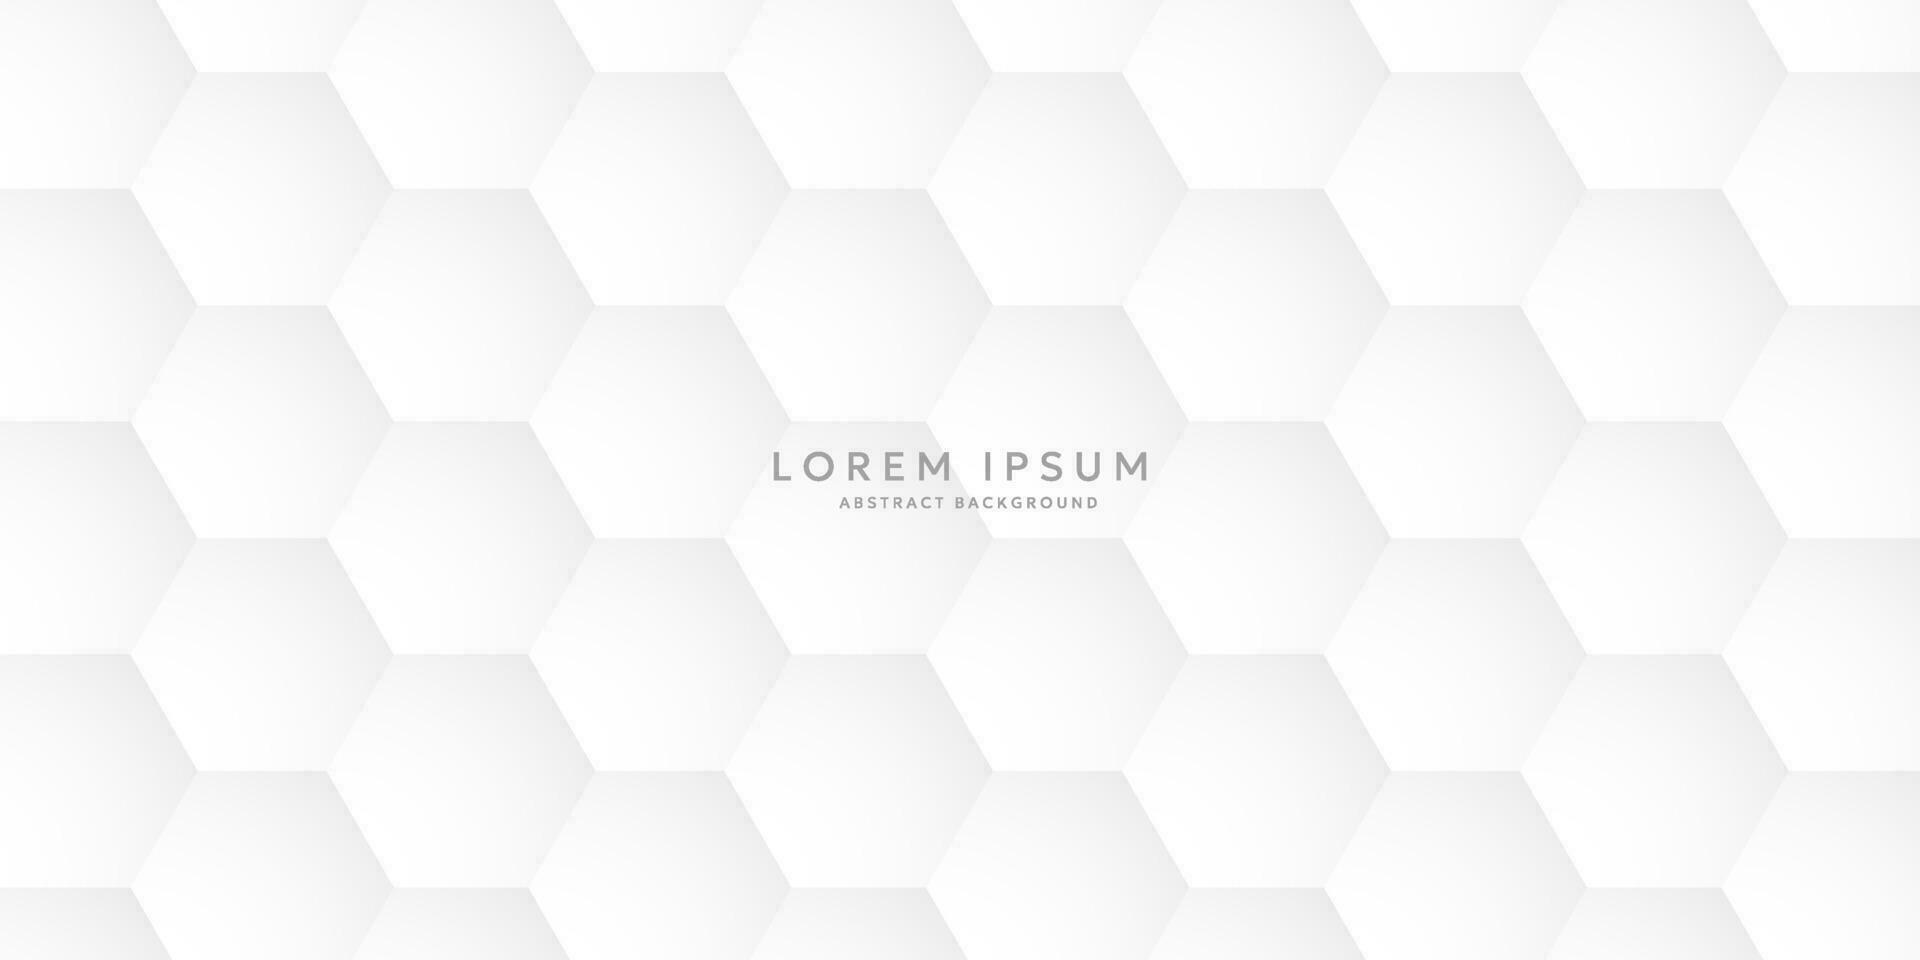 Hexagonal white abstract background for modern business work. vector